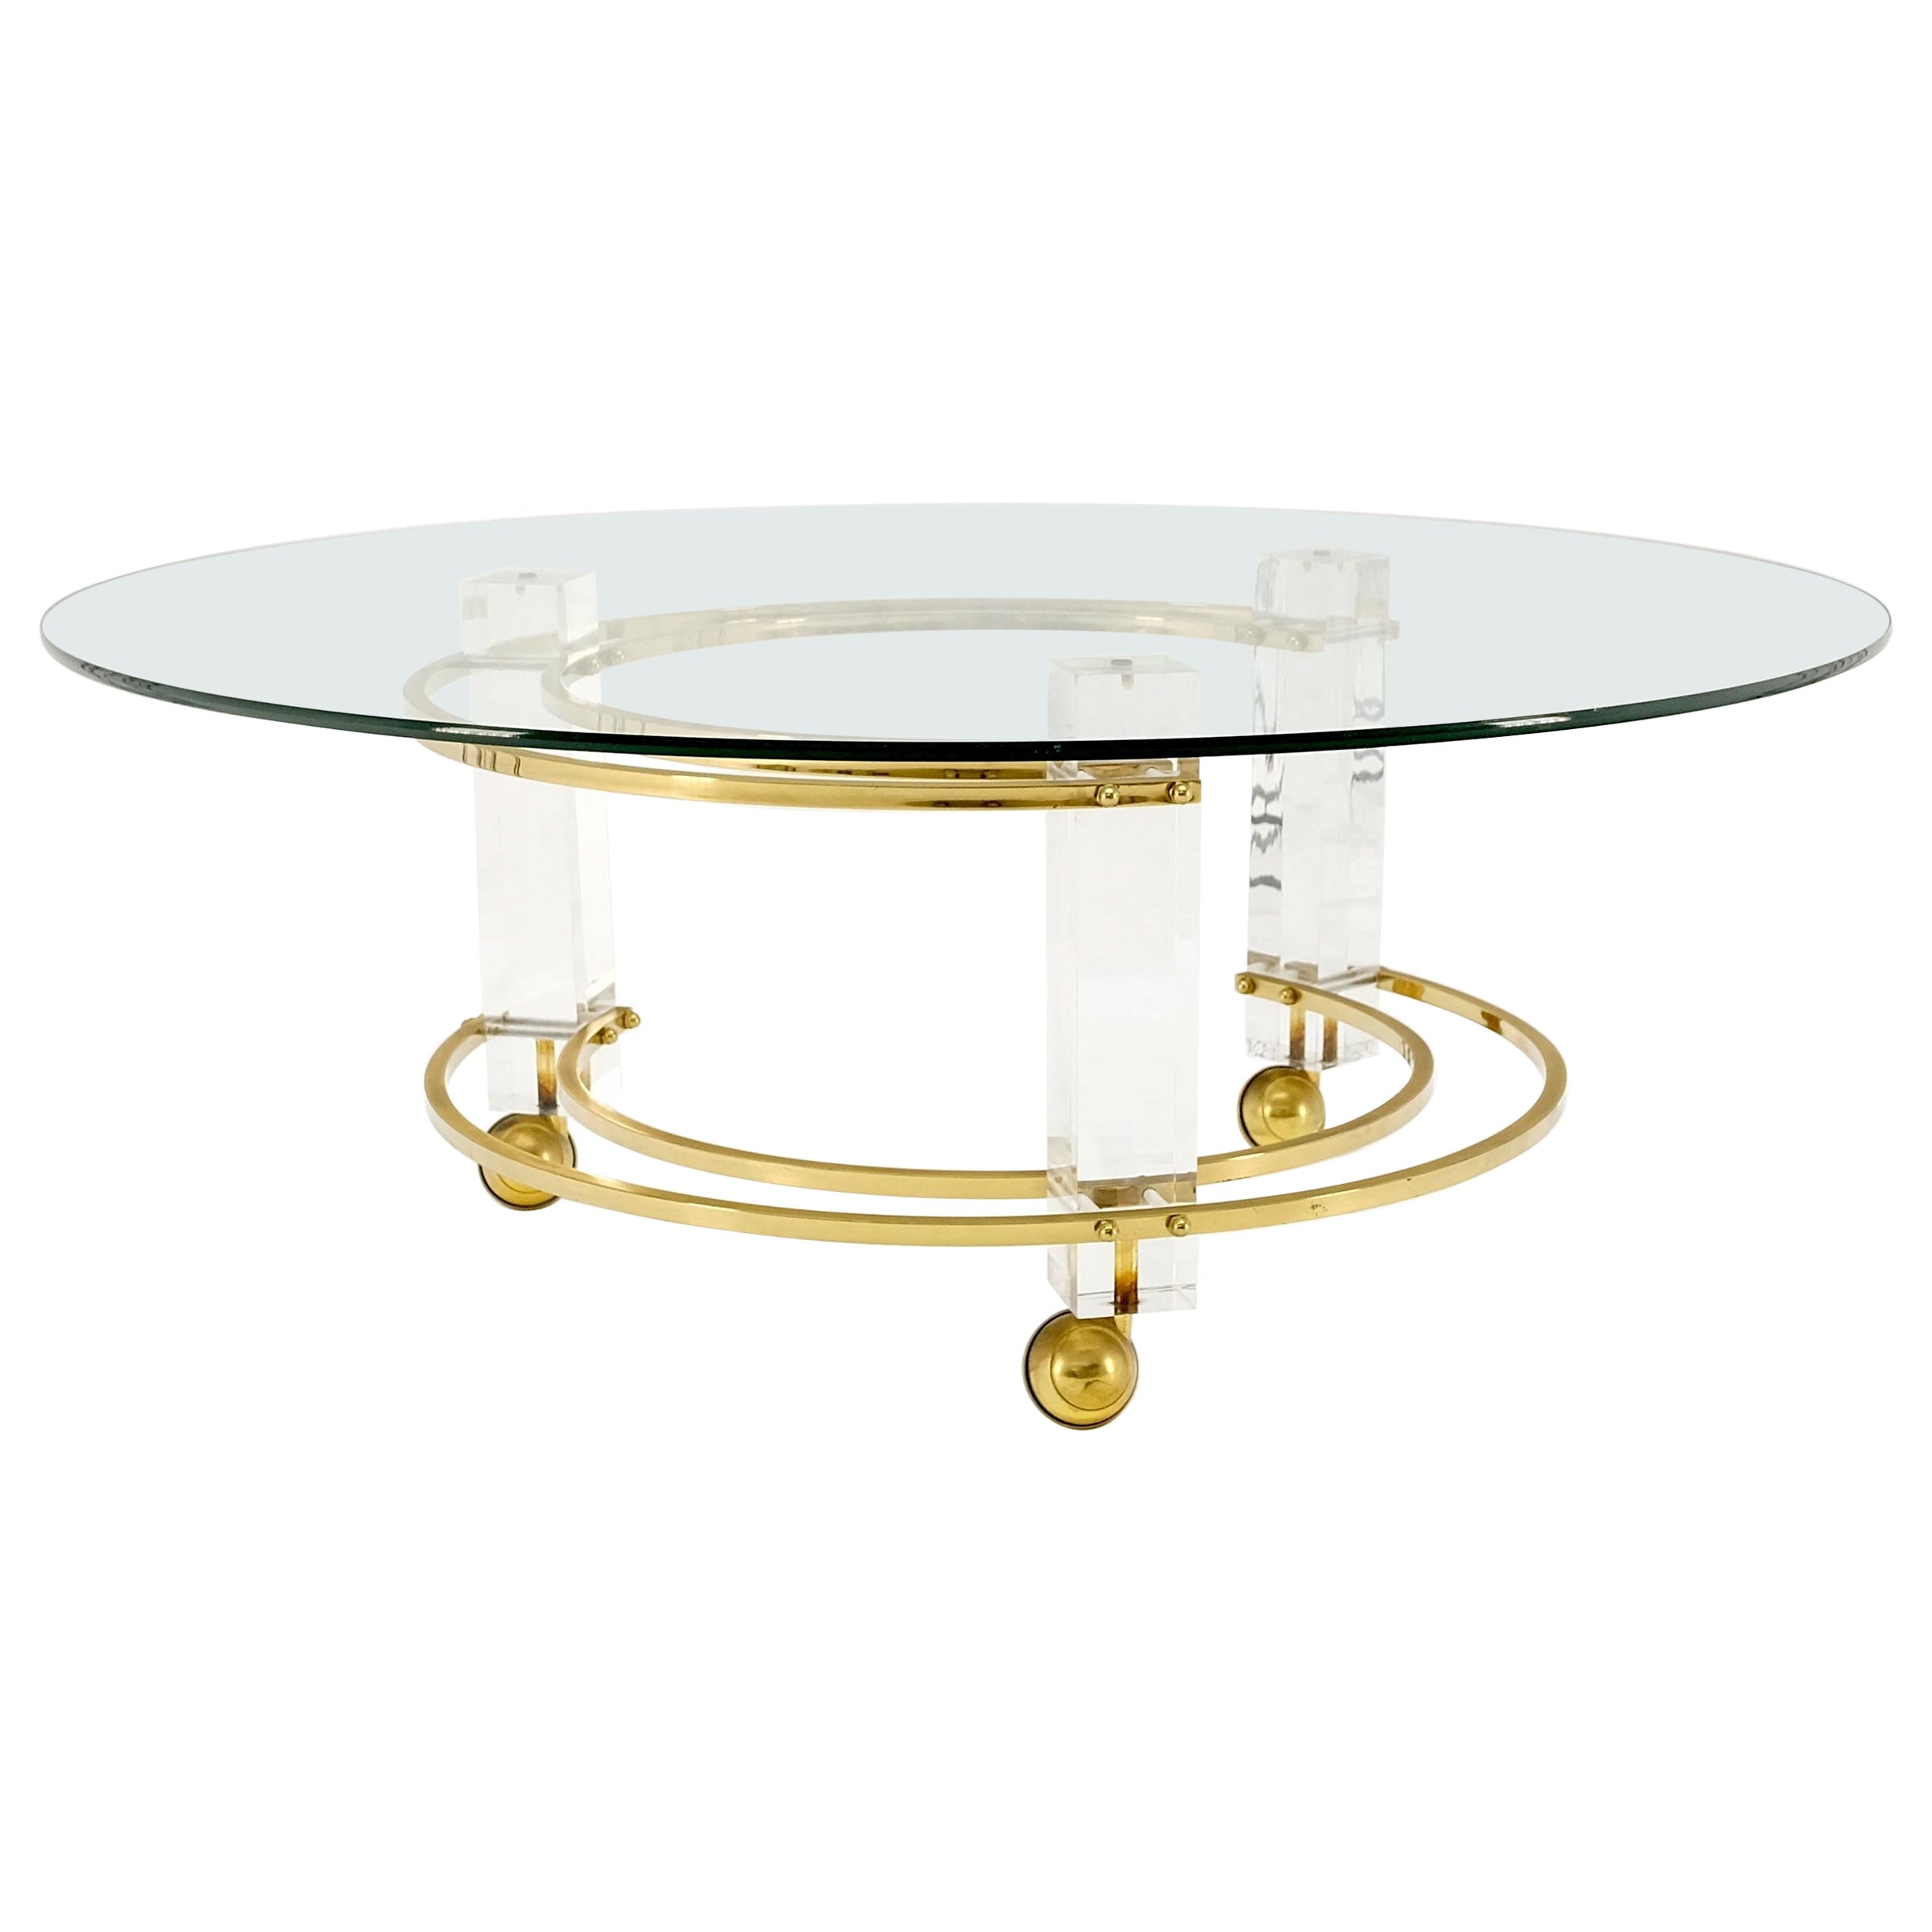 Polished Brass & Lucite Base Round Midcentury Coffee Table on Wheels Mint!